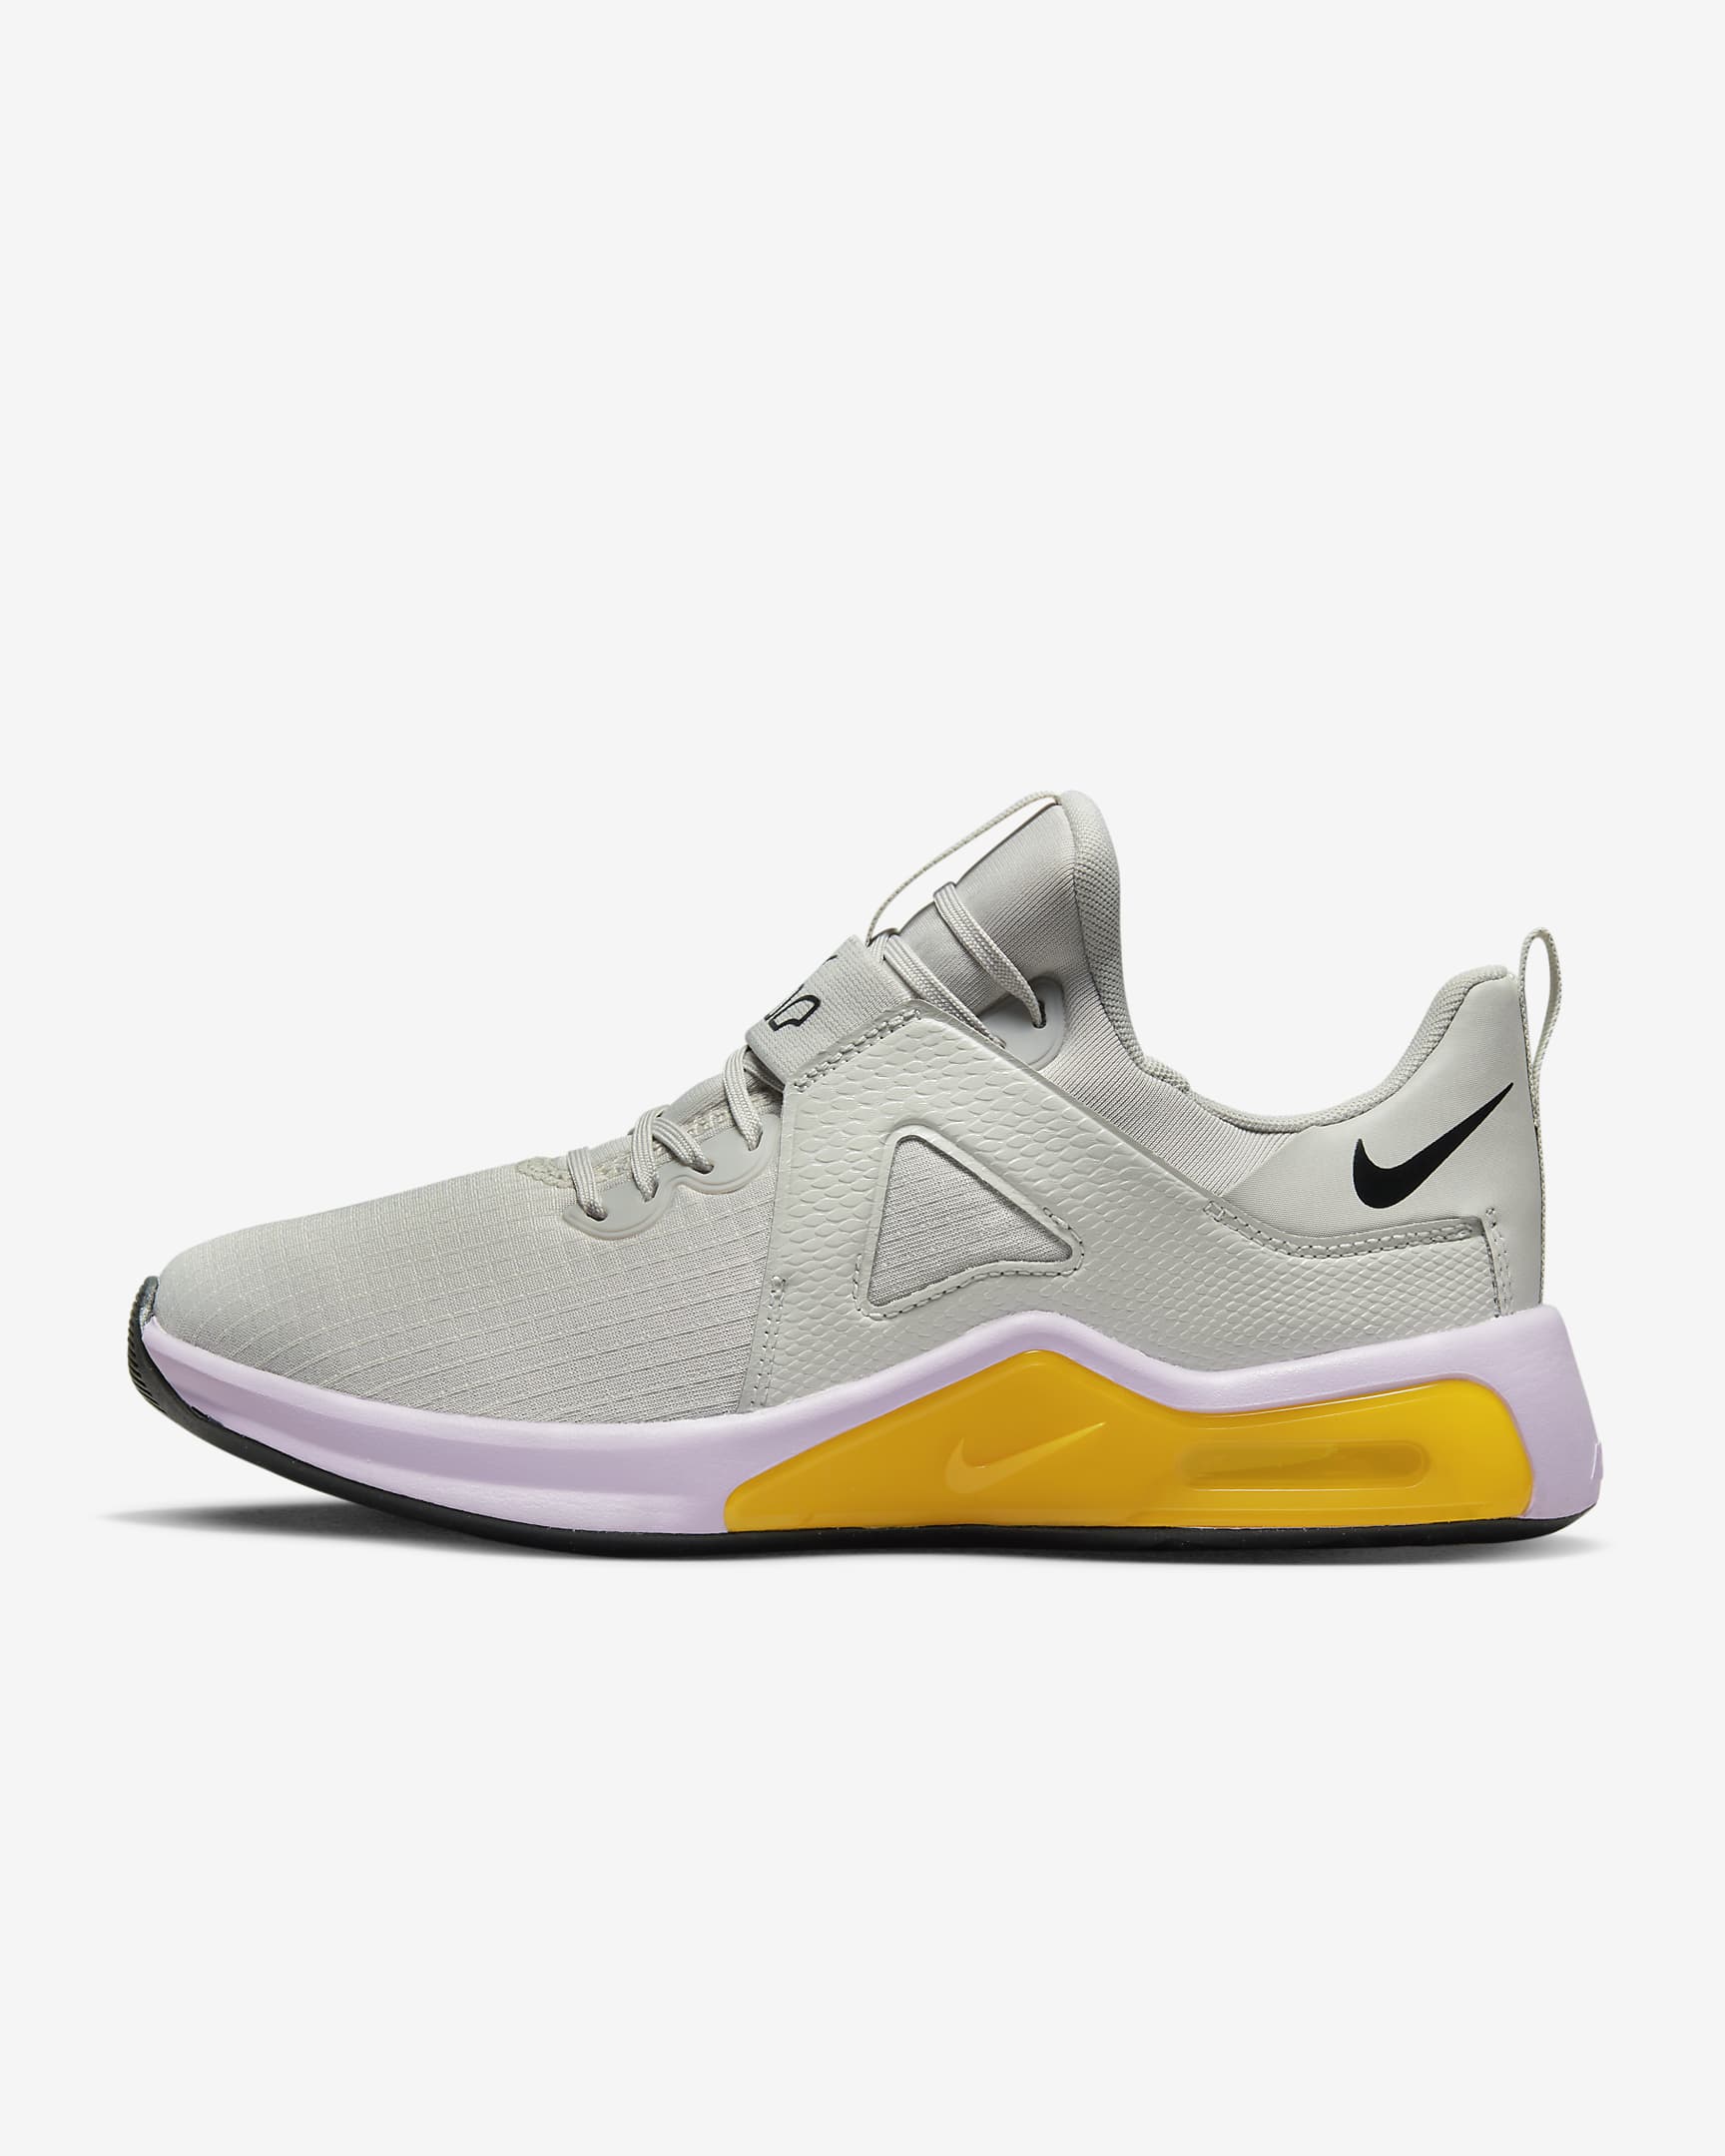 Nike Air Max Bella TR 5 Women's Workout Shoes - Light Iron Ore/Doll/Yellow Ochre/Black